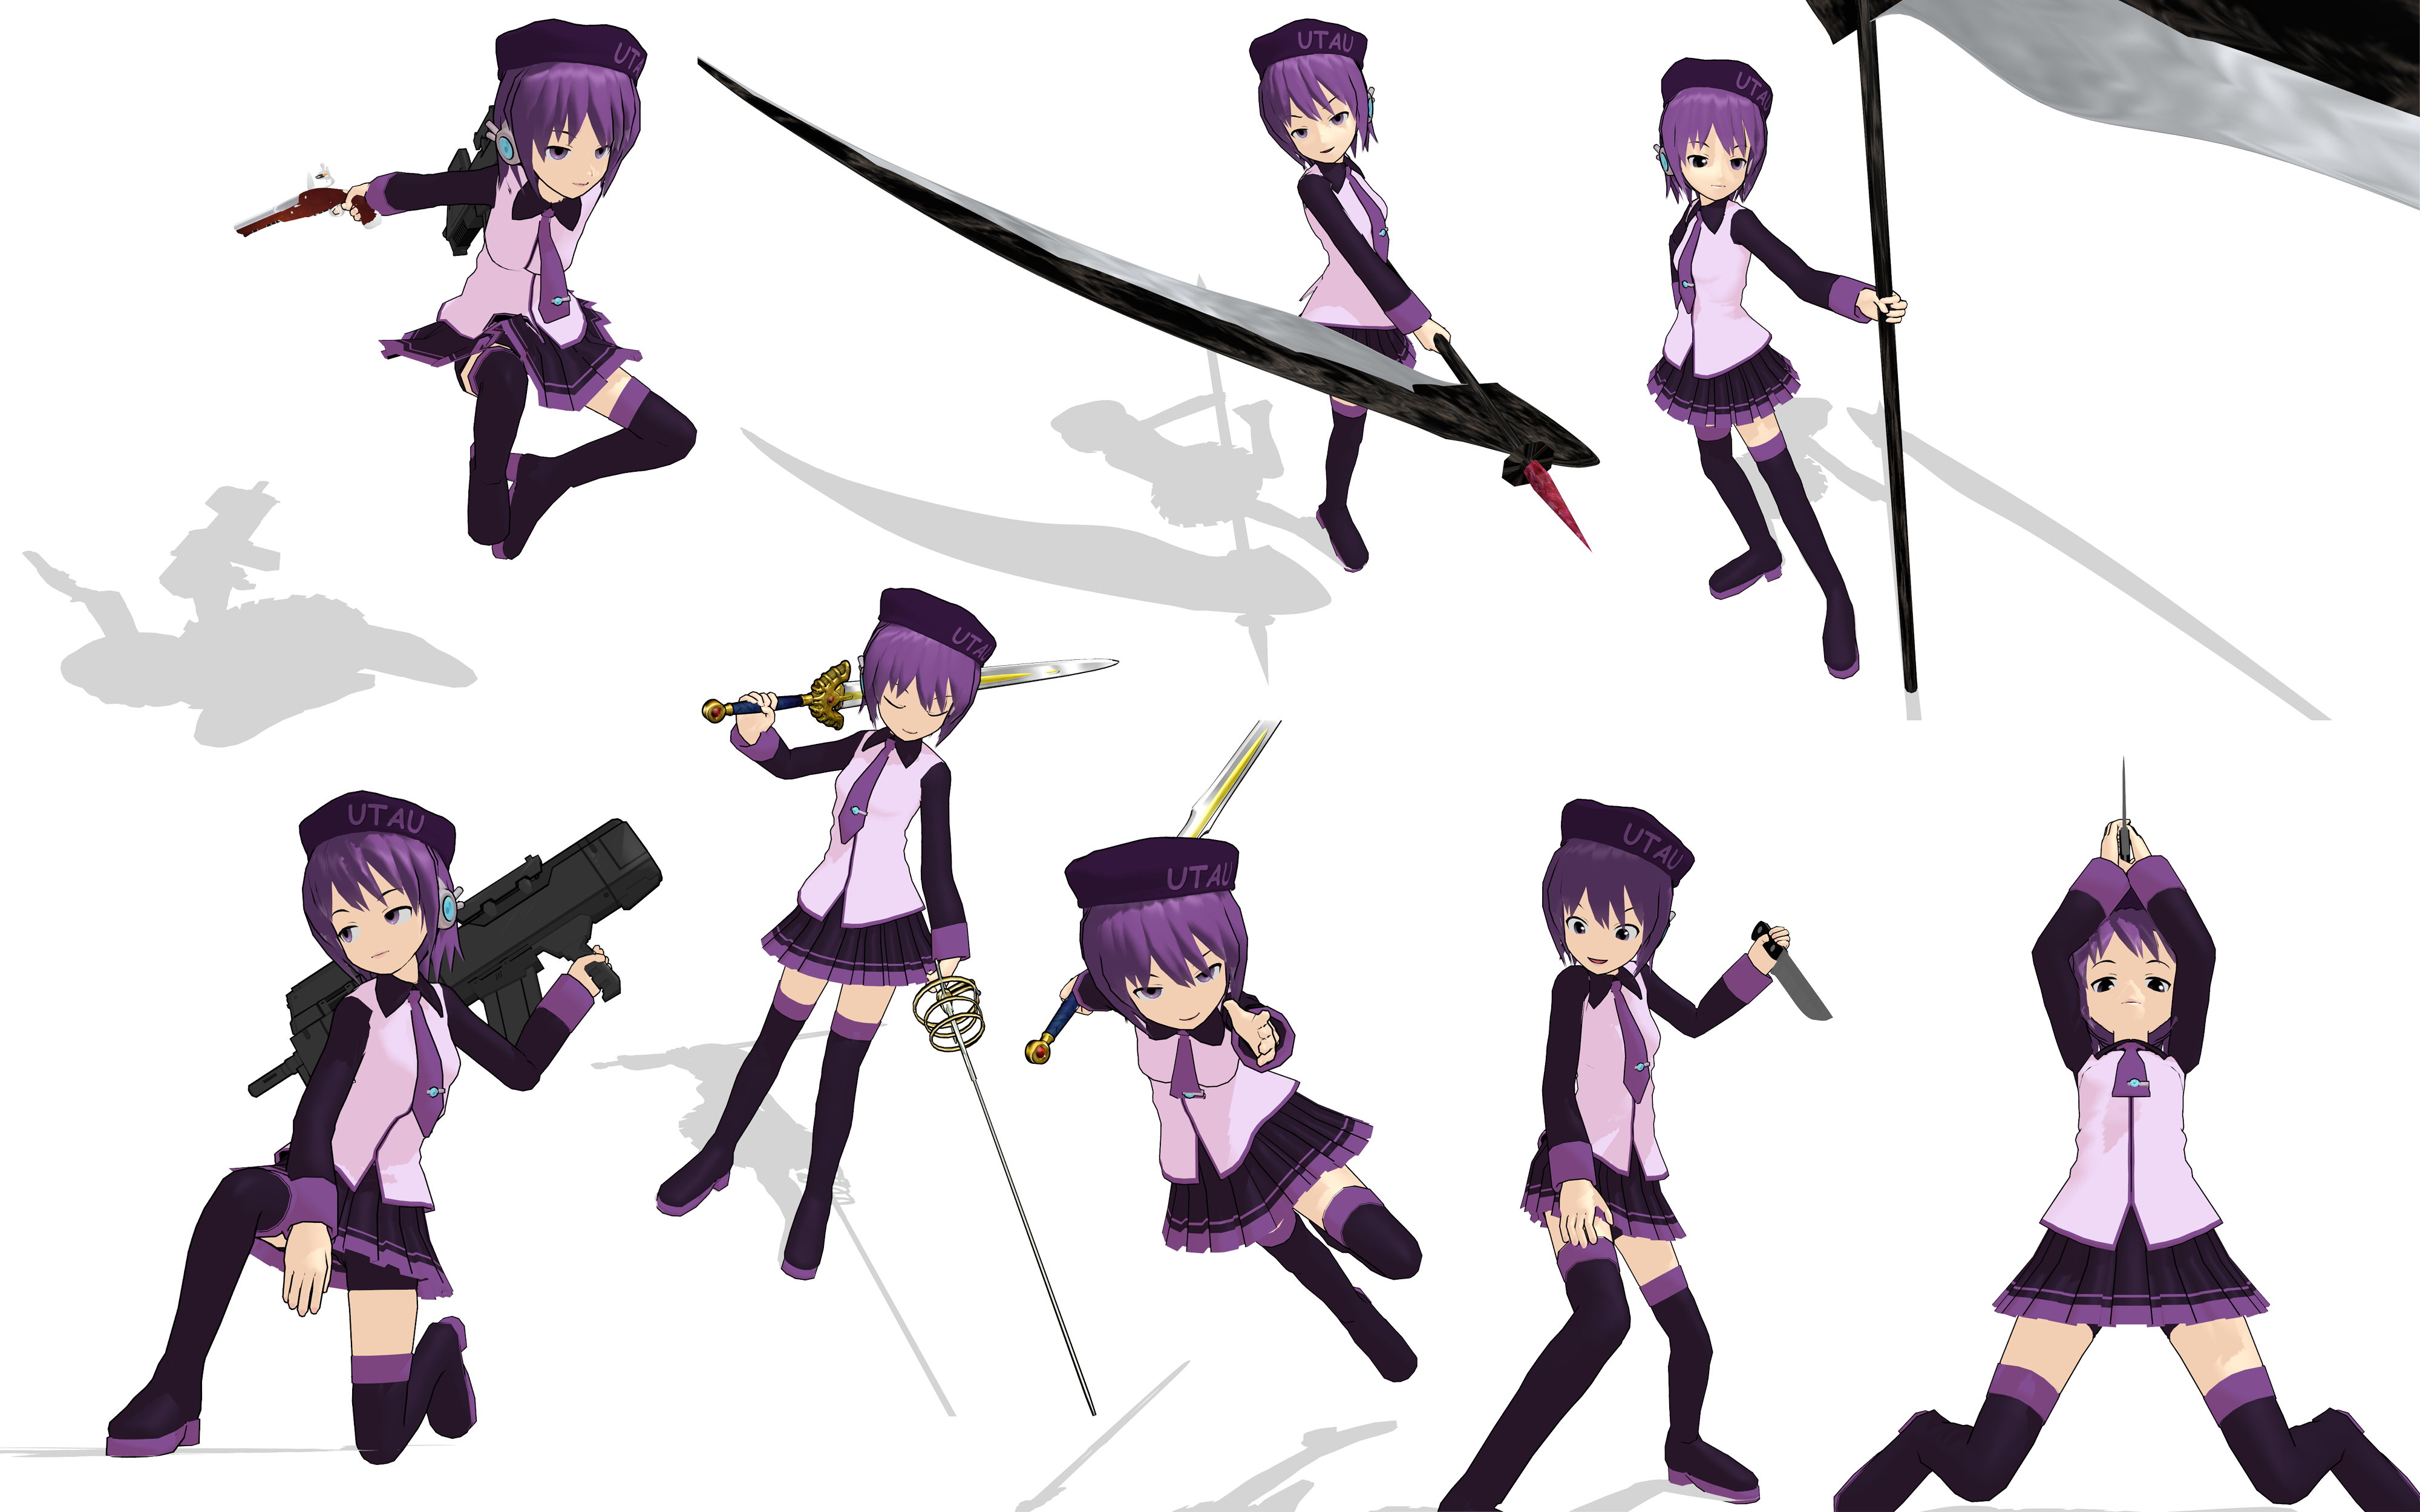 MMD Pose Pack: 8 Fighting Poses by AsparagusMMD on DeviantArt. 